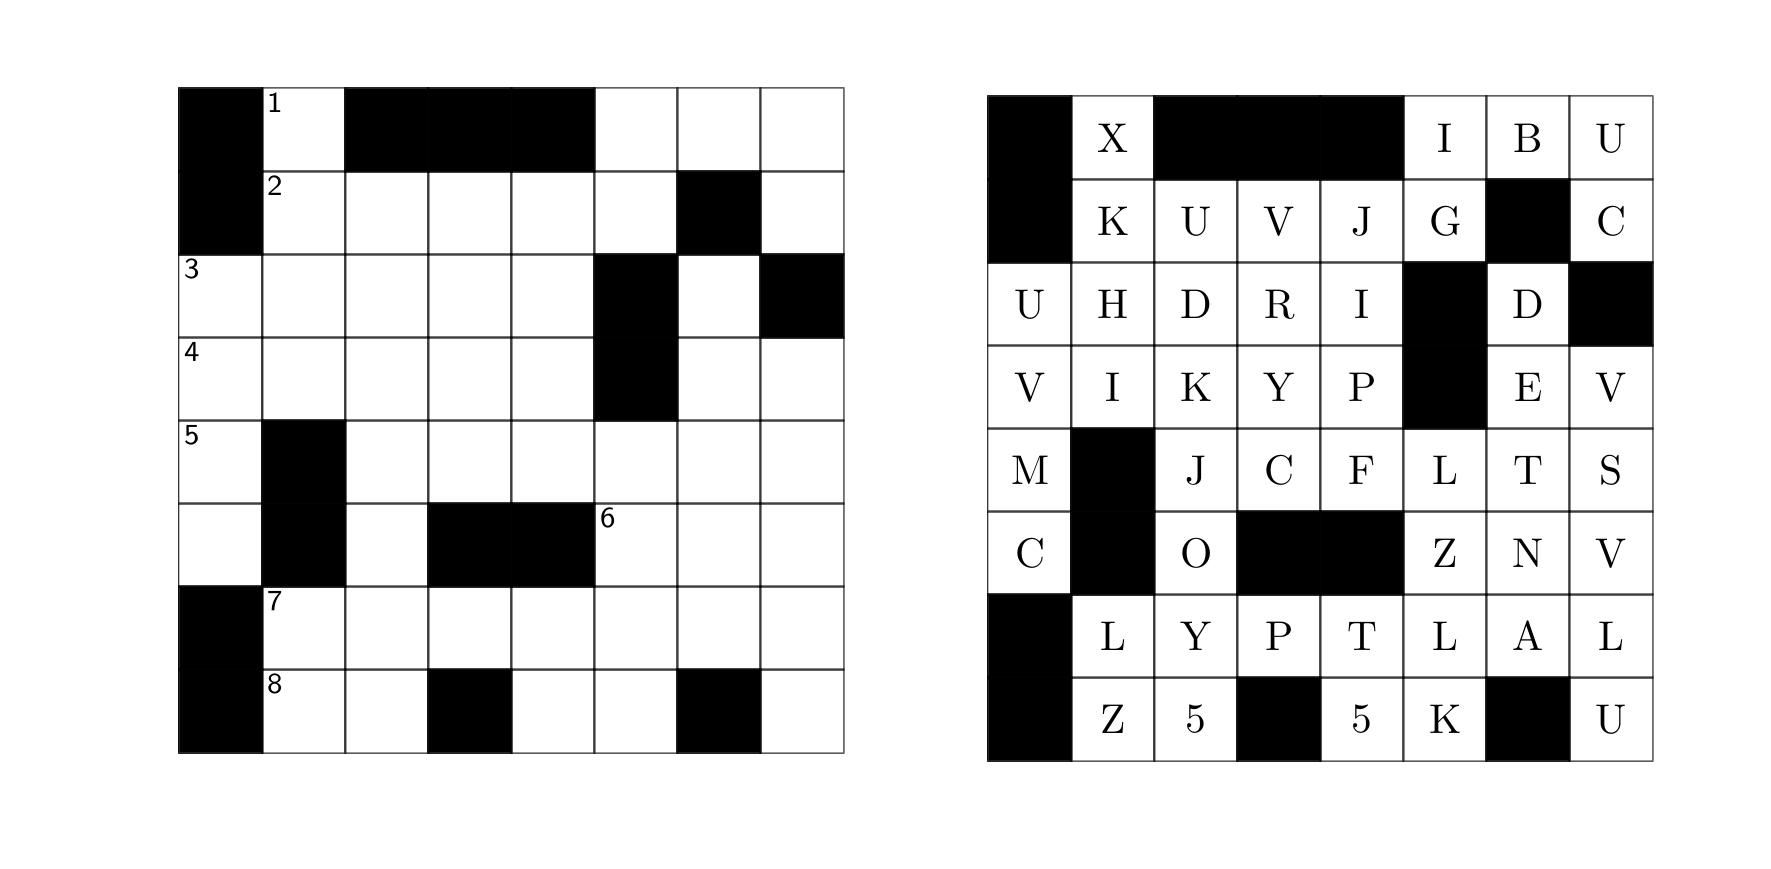 Two 8x8 grids of black and white squares (crossword puzzles) are printed next to each other. One of the grids contains numbers, the other contains letters. The black squares are represented by *s, white squares by -s in the grids below: * 1 * * * - - -   * X * * * I B U ; * 2 - - - - * -   * K U V J G * C ; 3 - - - - * - *   U H D R I * D * ; 4 - - - - * - -   V I K Y P * E V ; 5 * - - - - - -   M * J C F L T S ; - * - * * 6 - -   C * O * * Z N V ; * - - - - - - -   * L Y P T L A L ; * - - * - - * -   * Z 5 * 5 K * U